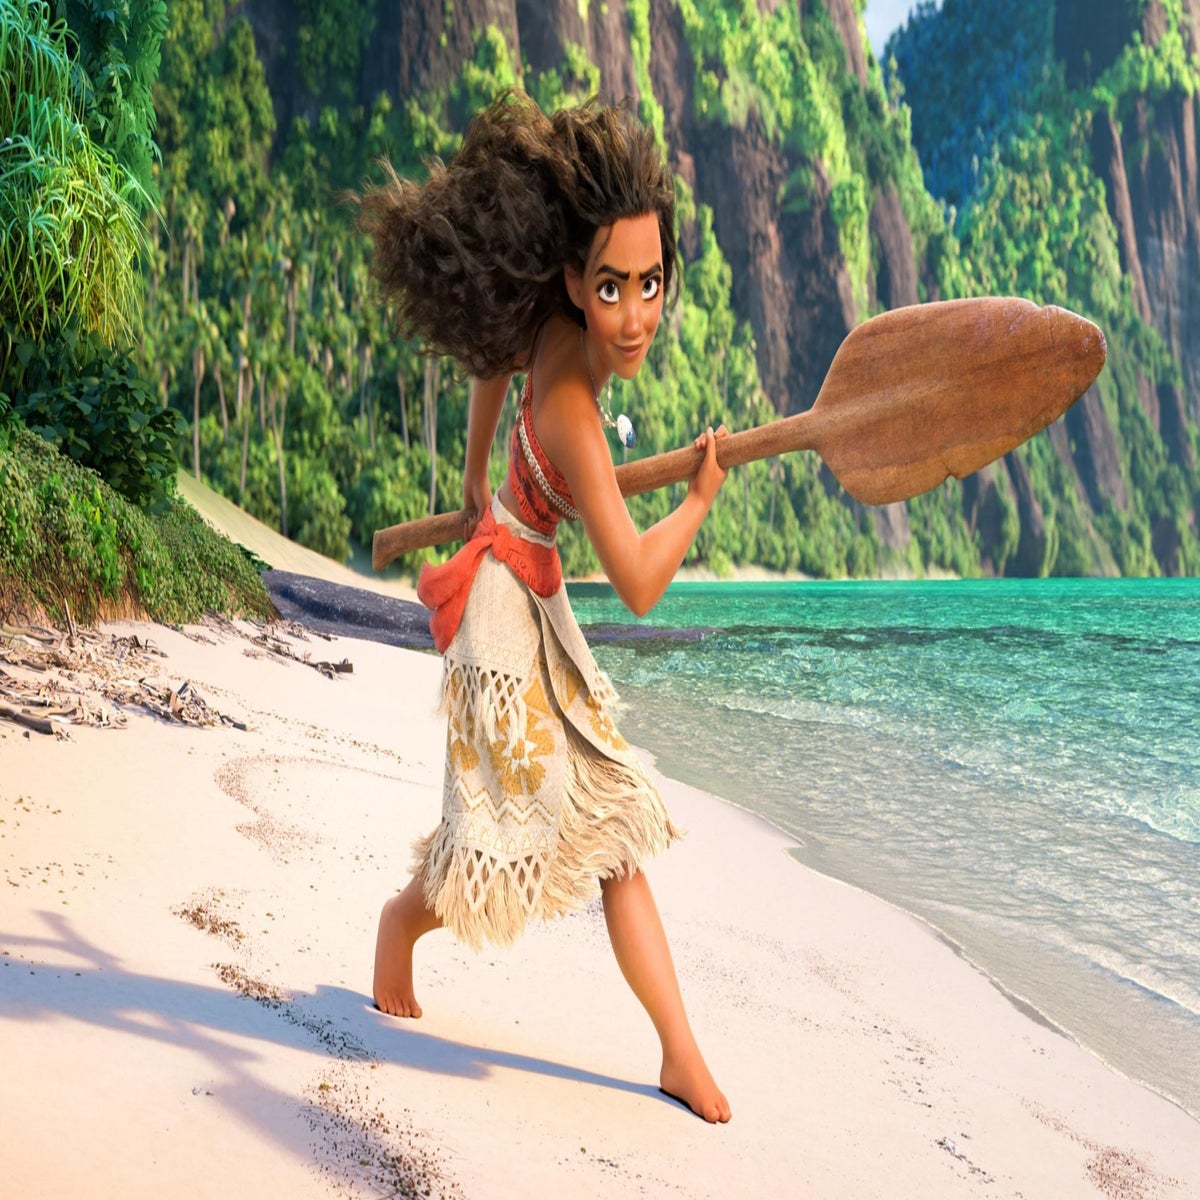 https://static.independent.co.uk/s3fs-public/thumbnails/image/2016/09/15/17/moana-0.jpg?width=1200&height=1200&fit=crop